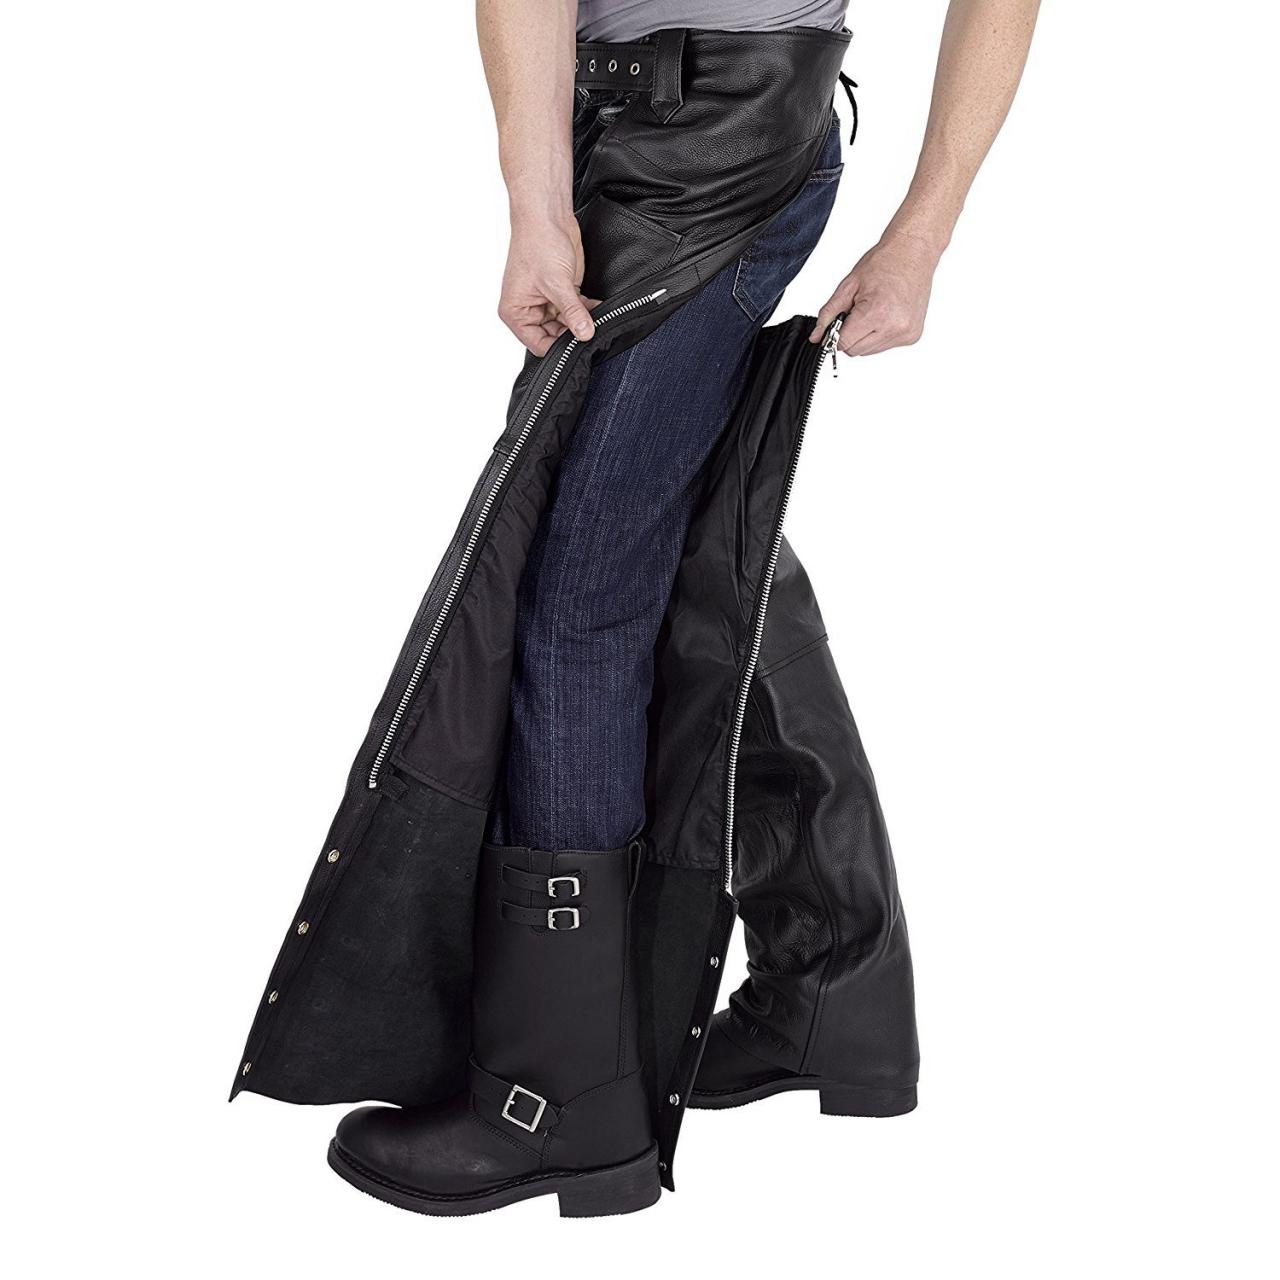 Plain Motorcycle Leather Chaps For Men Viking Cycle Leather Chaps  Protective Gear hauglegesenter Pants & Chaps